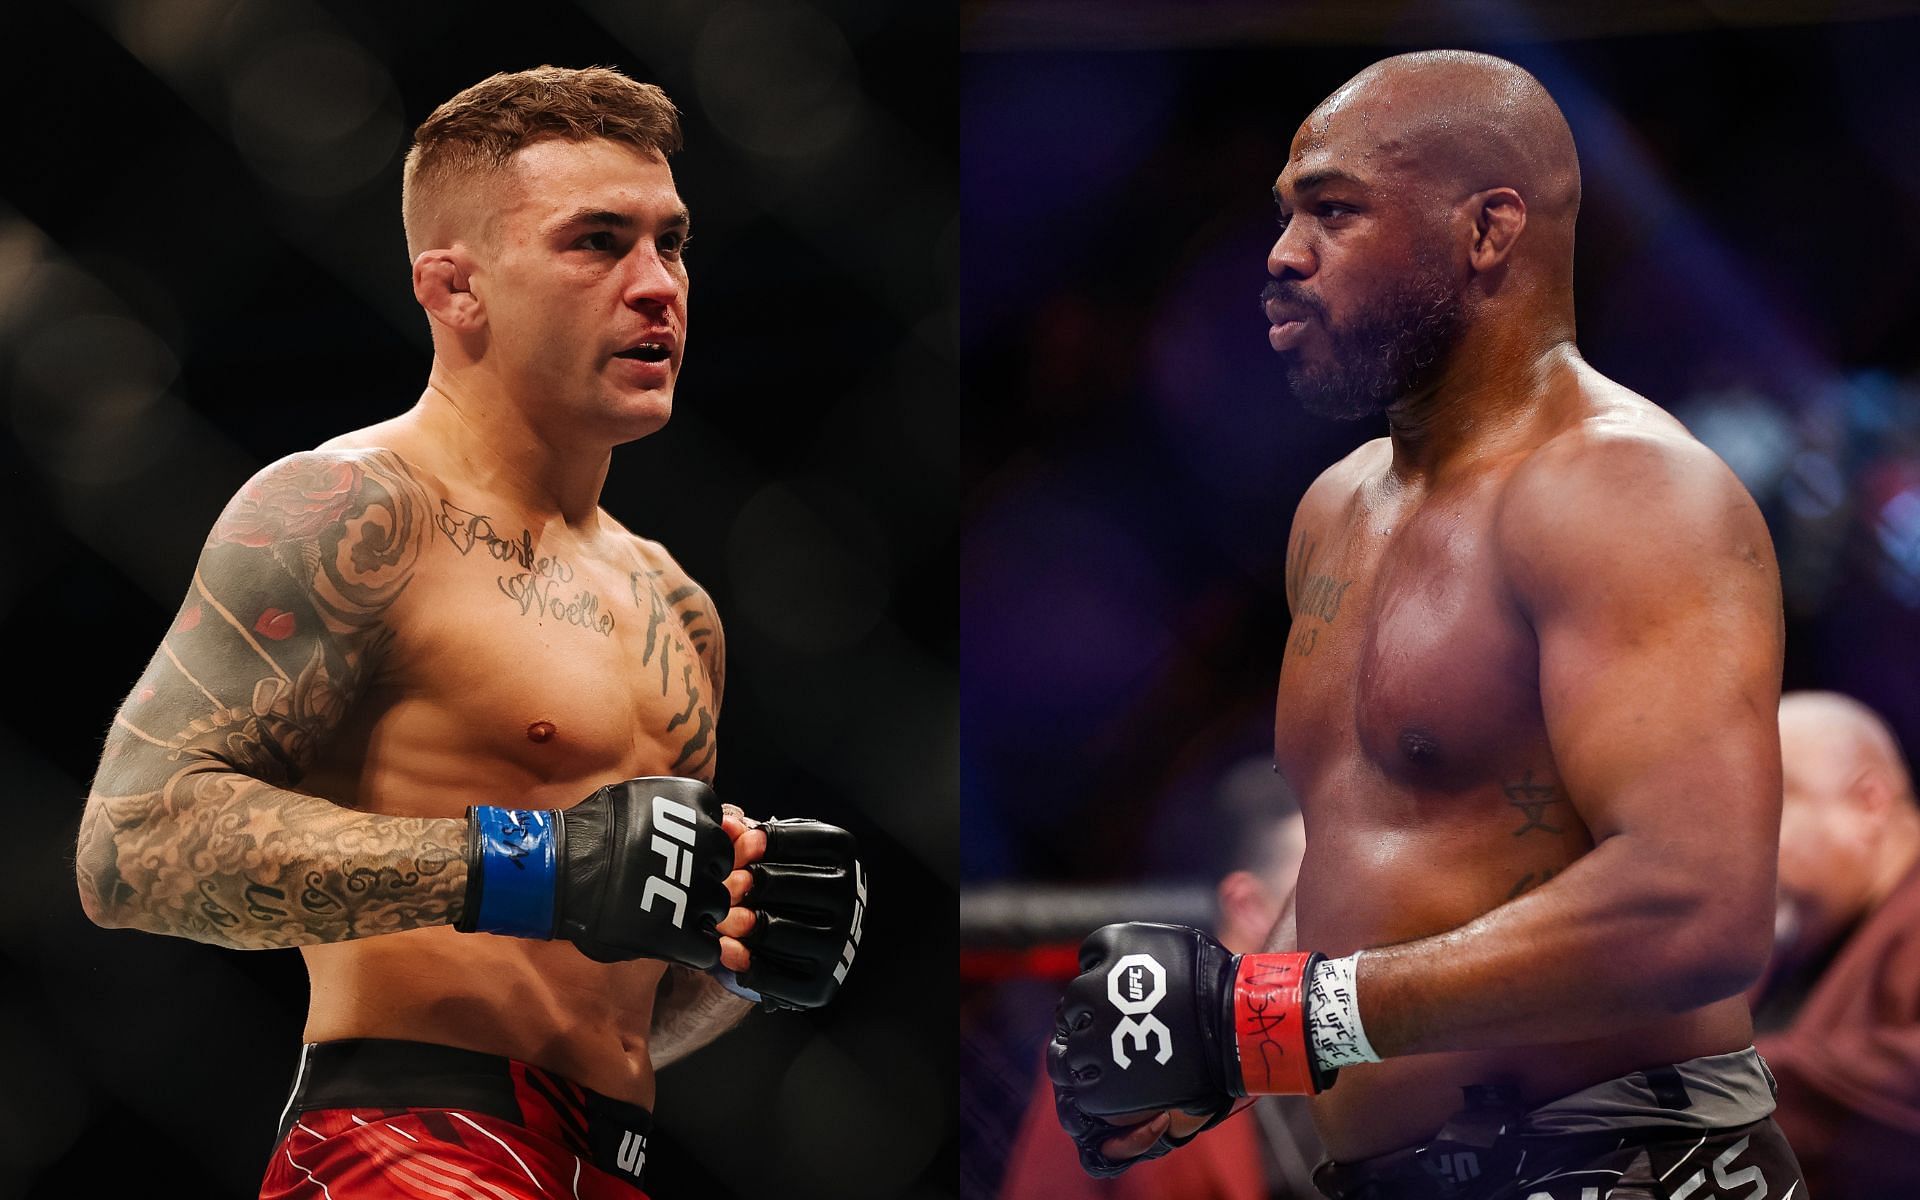 Dustin Poirier (left) and Jon Jones (right) have both been a part of the UFC roster for over a decade [Images courtesy: Getty Images]